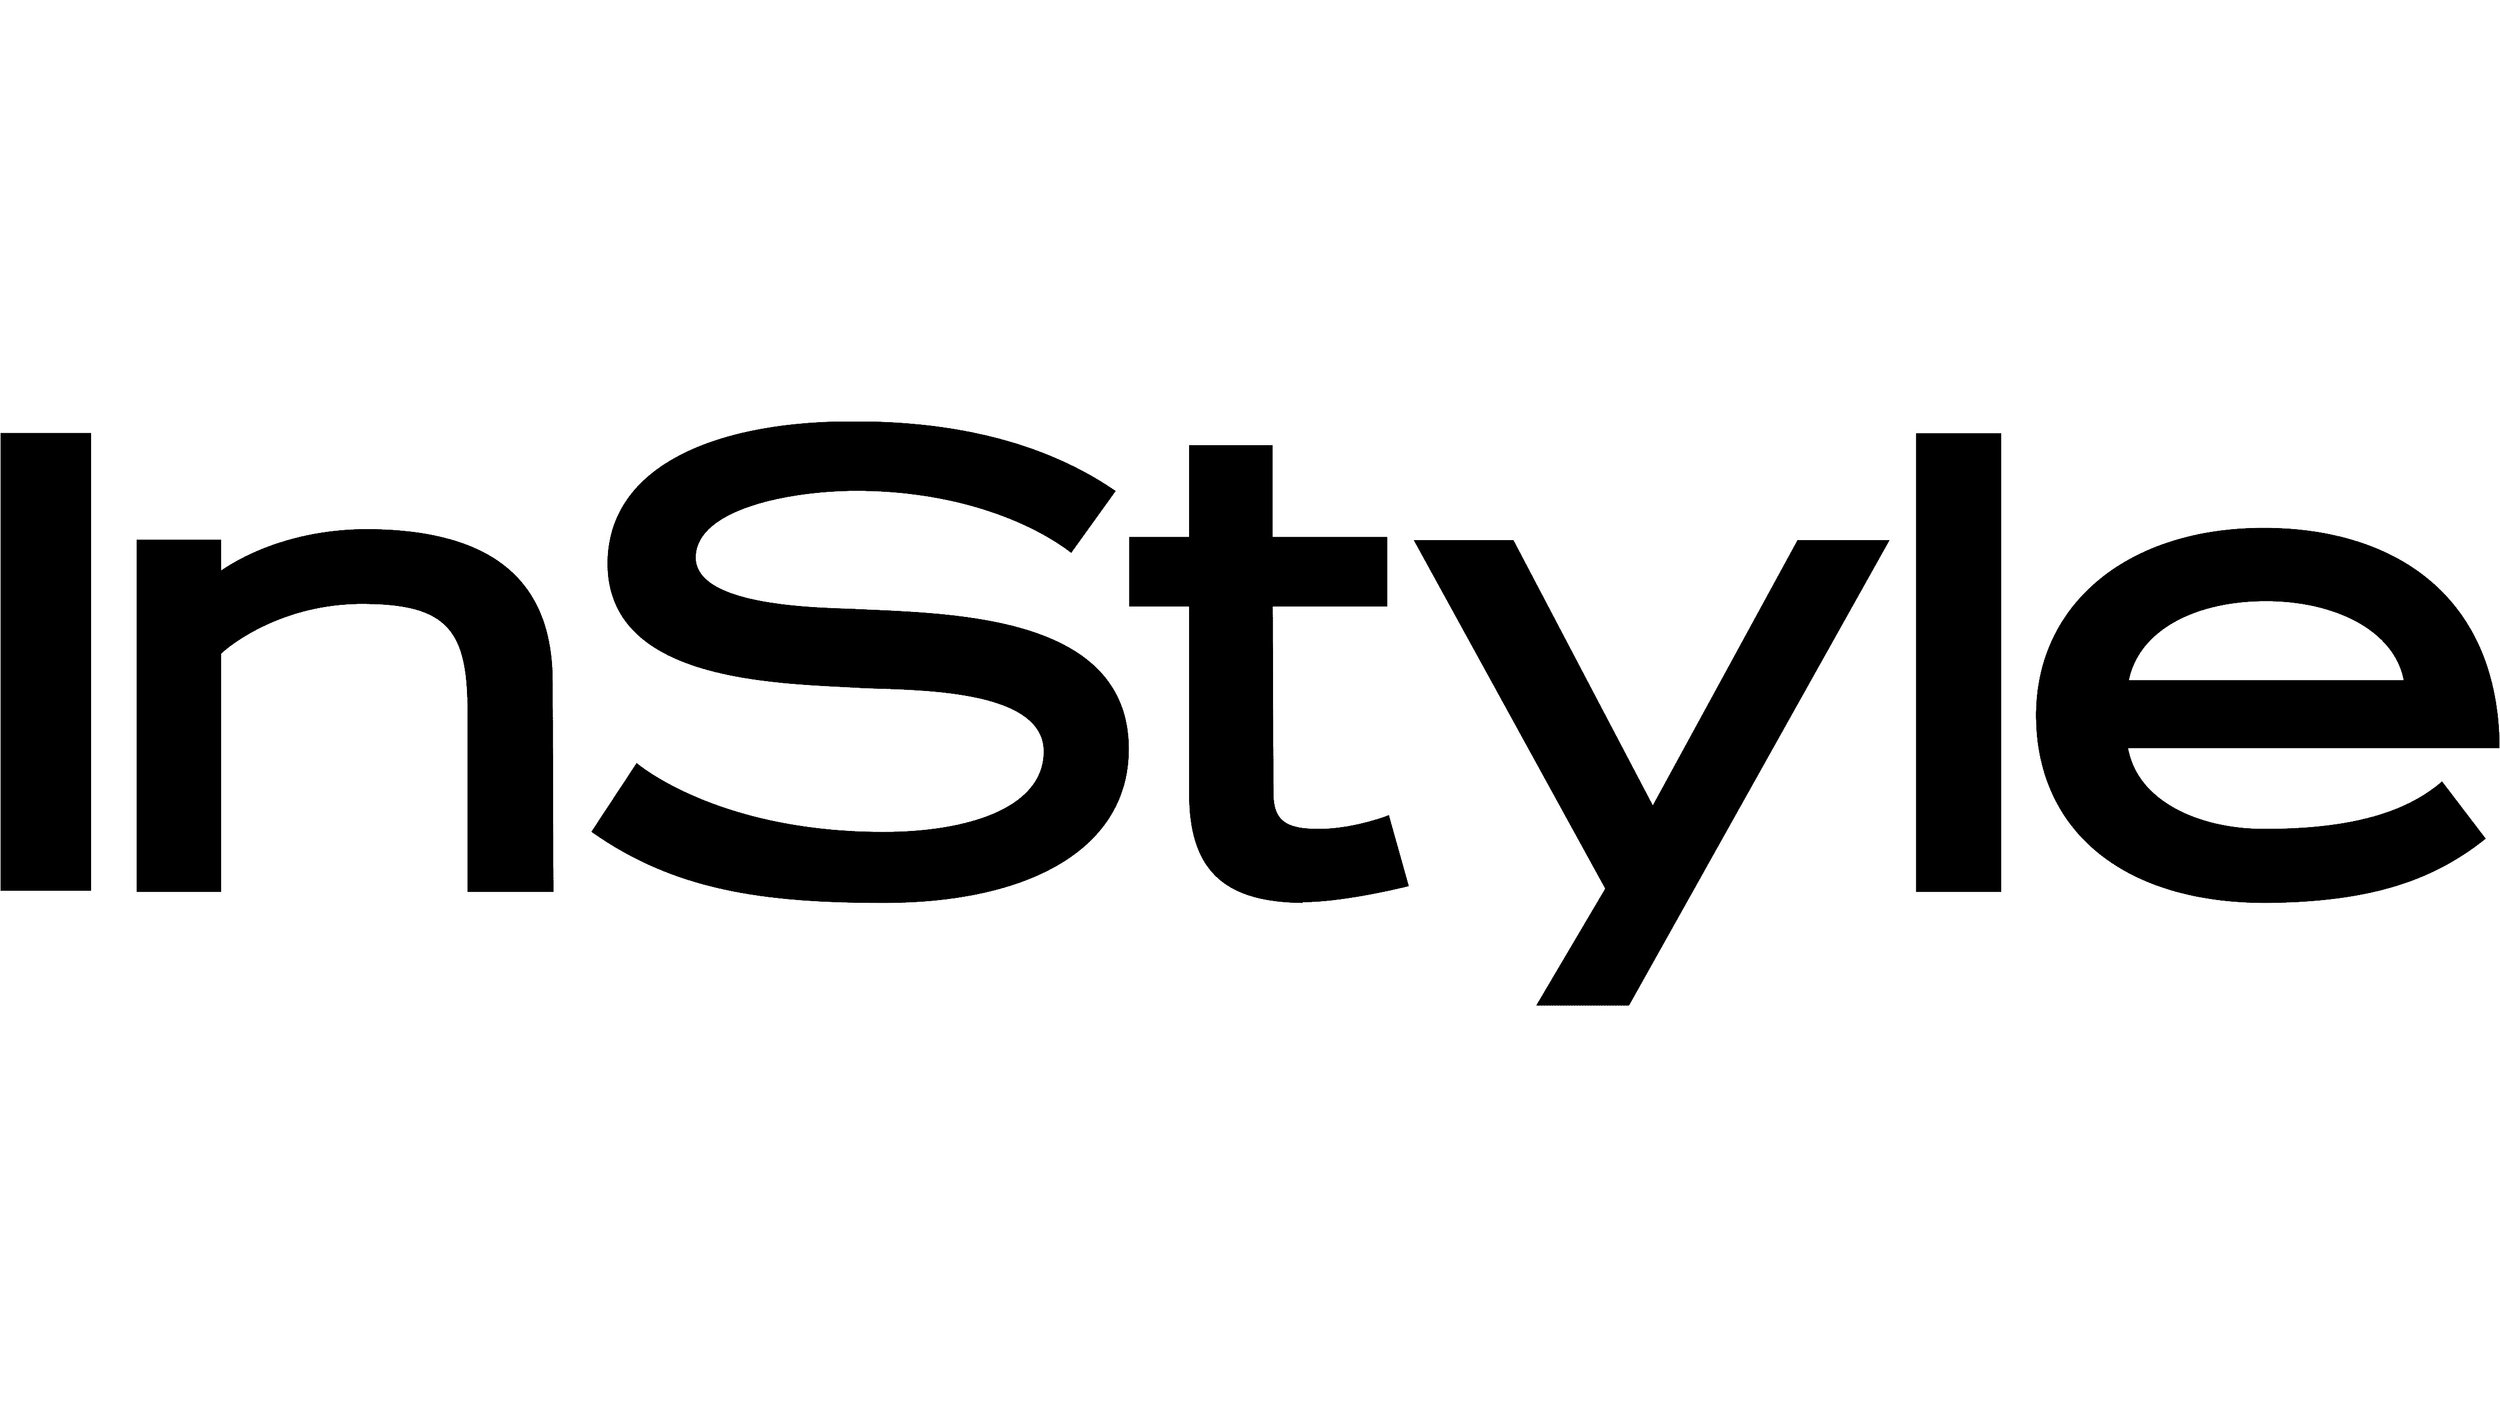 yescollective-instyle.jpg